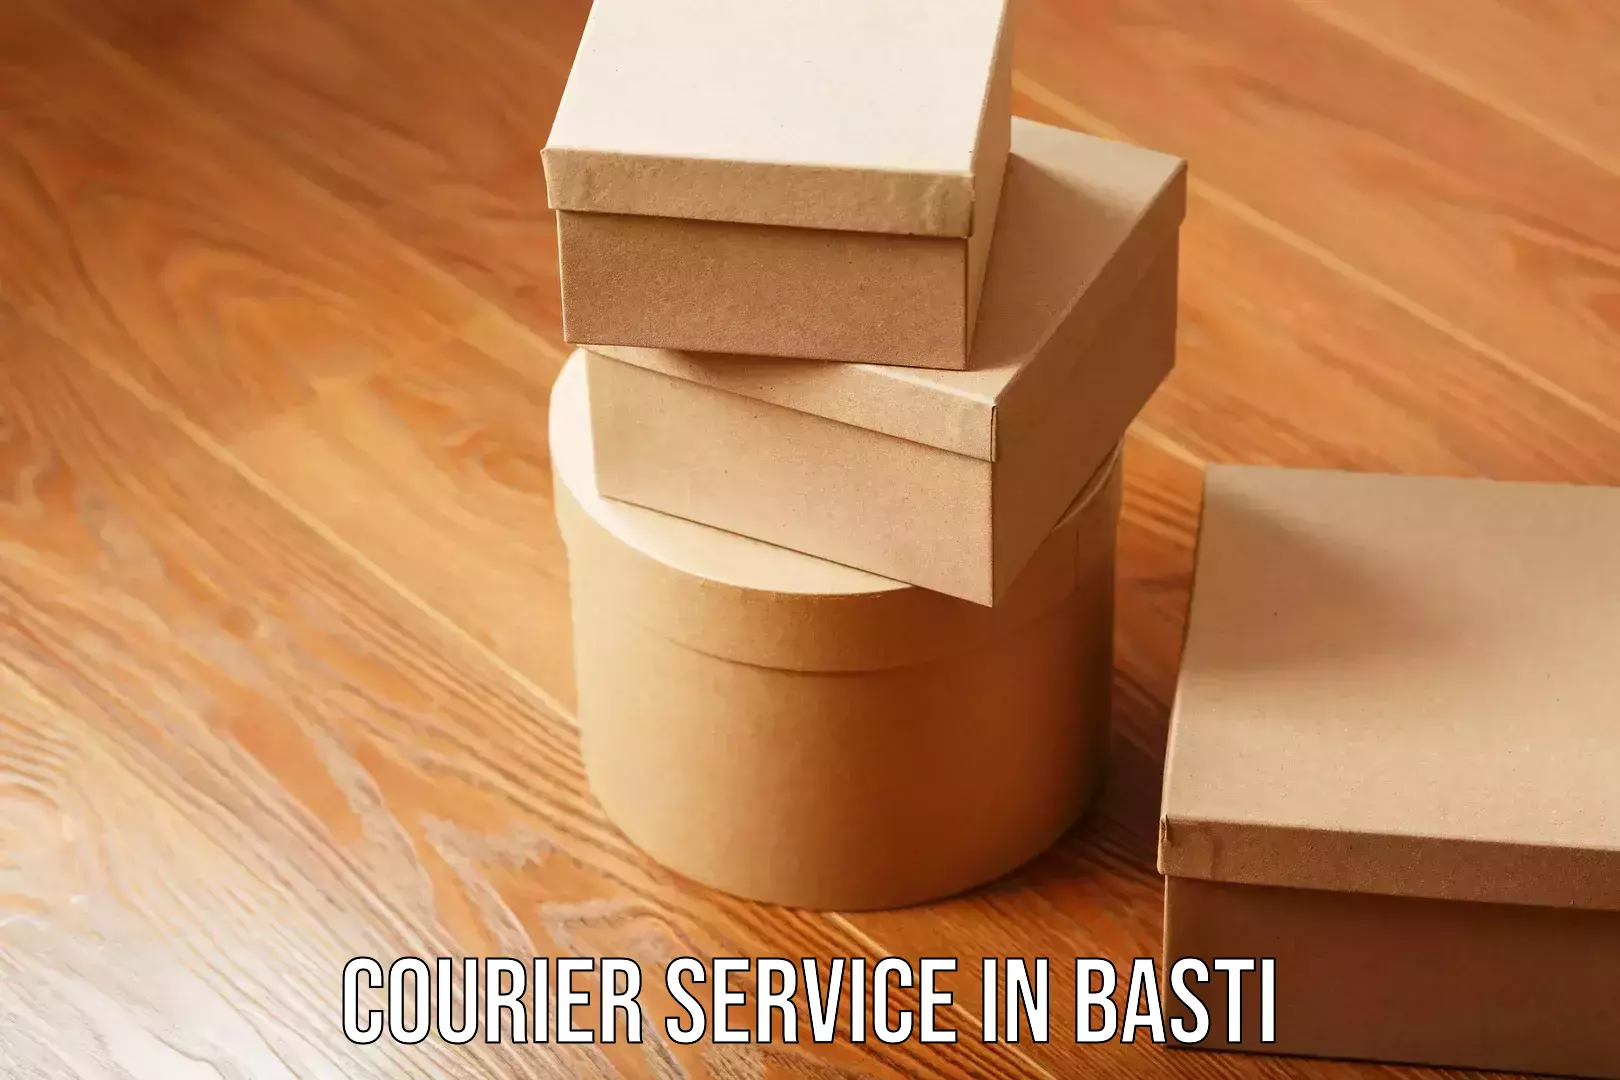 Express mail solutions in Basti